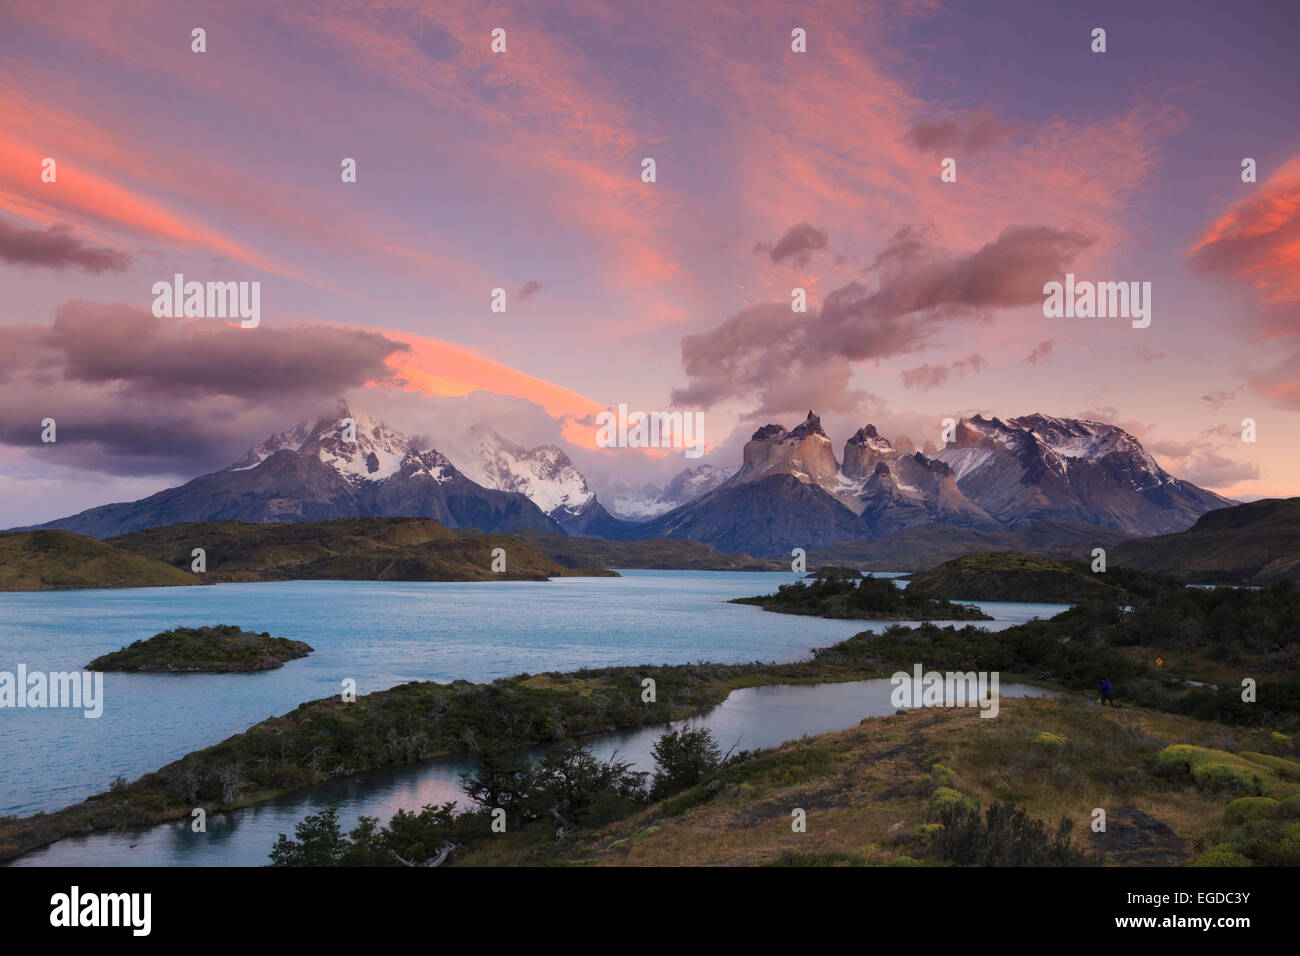 Chile, Patagonien, Torres del Paine Nationalpark (UNESCO-Website), See Peohe Stockfoto